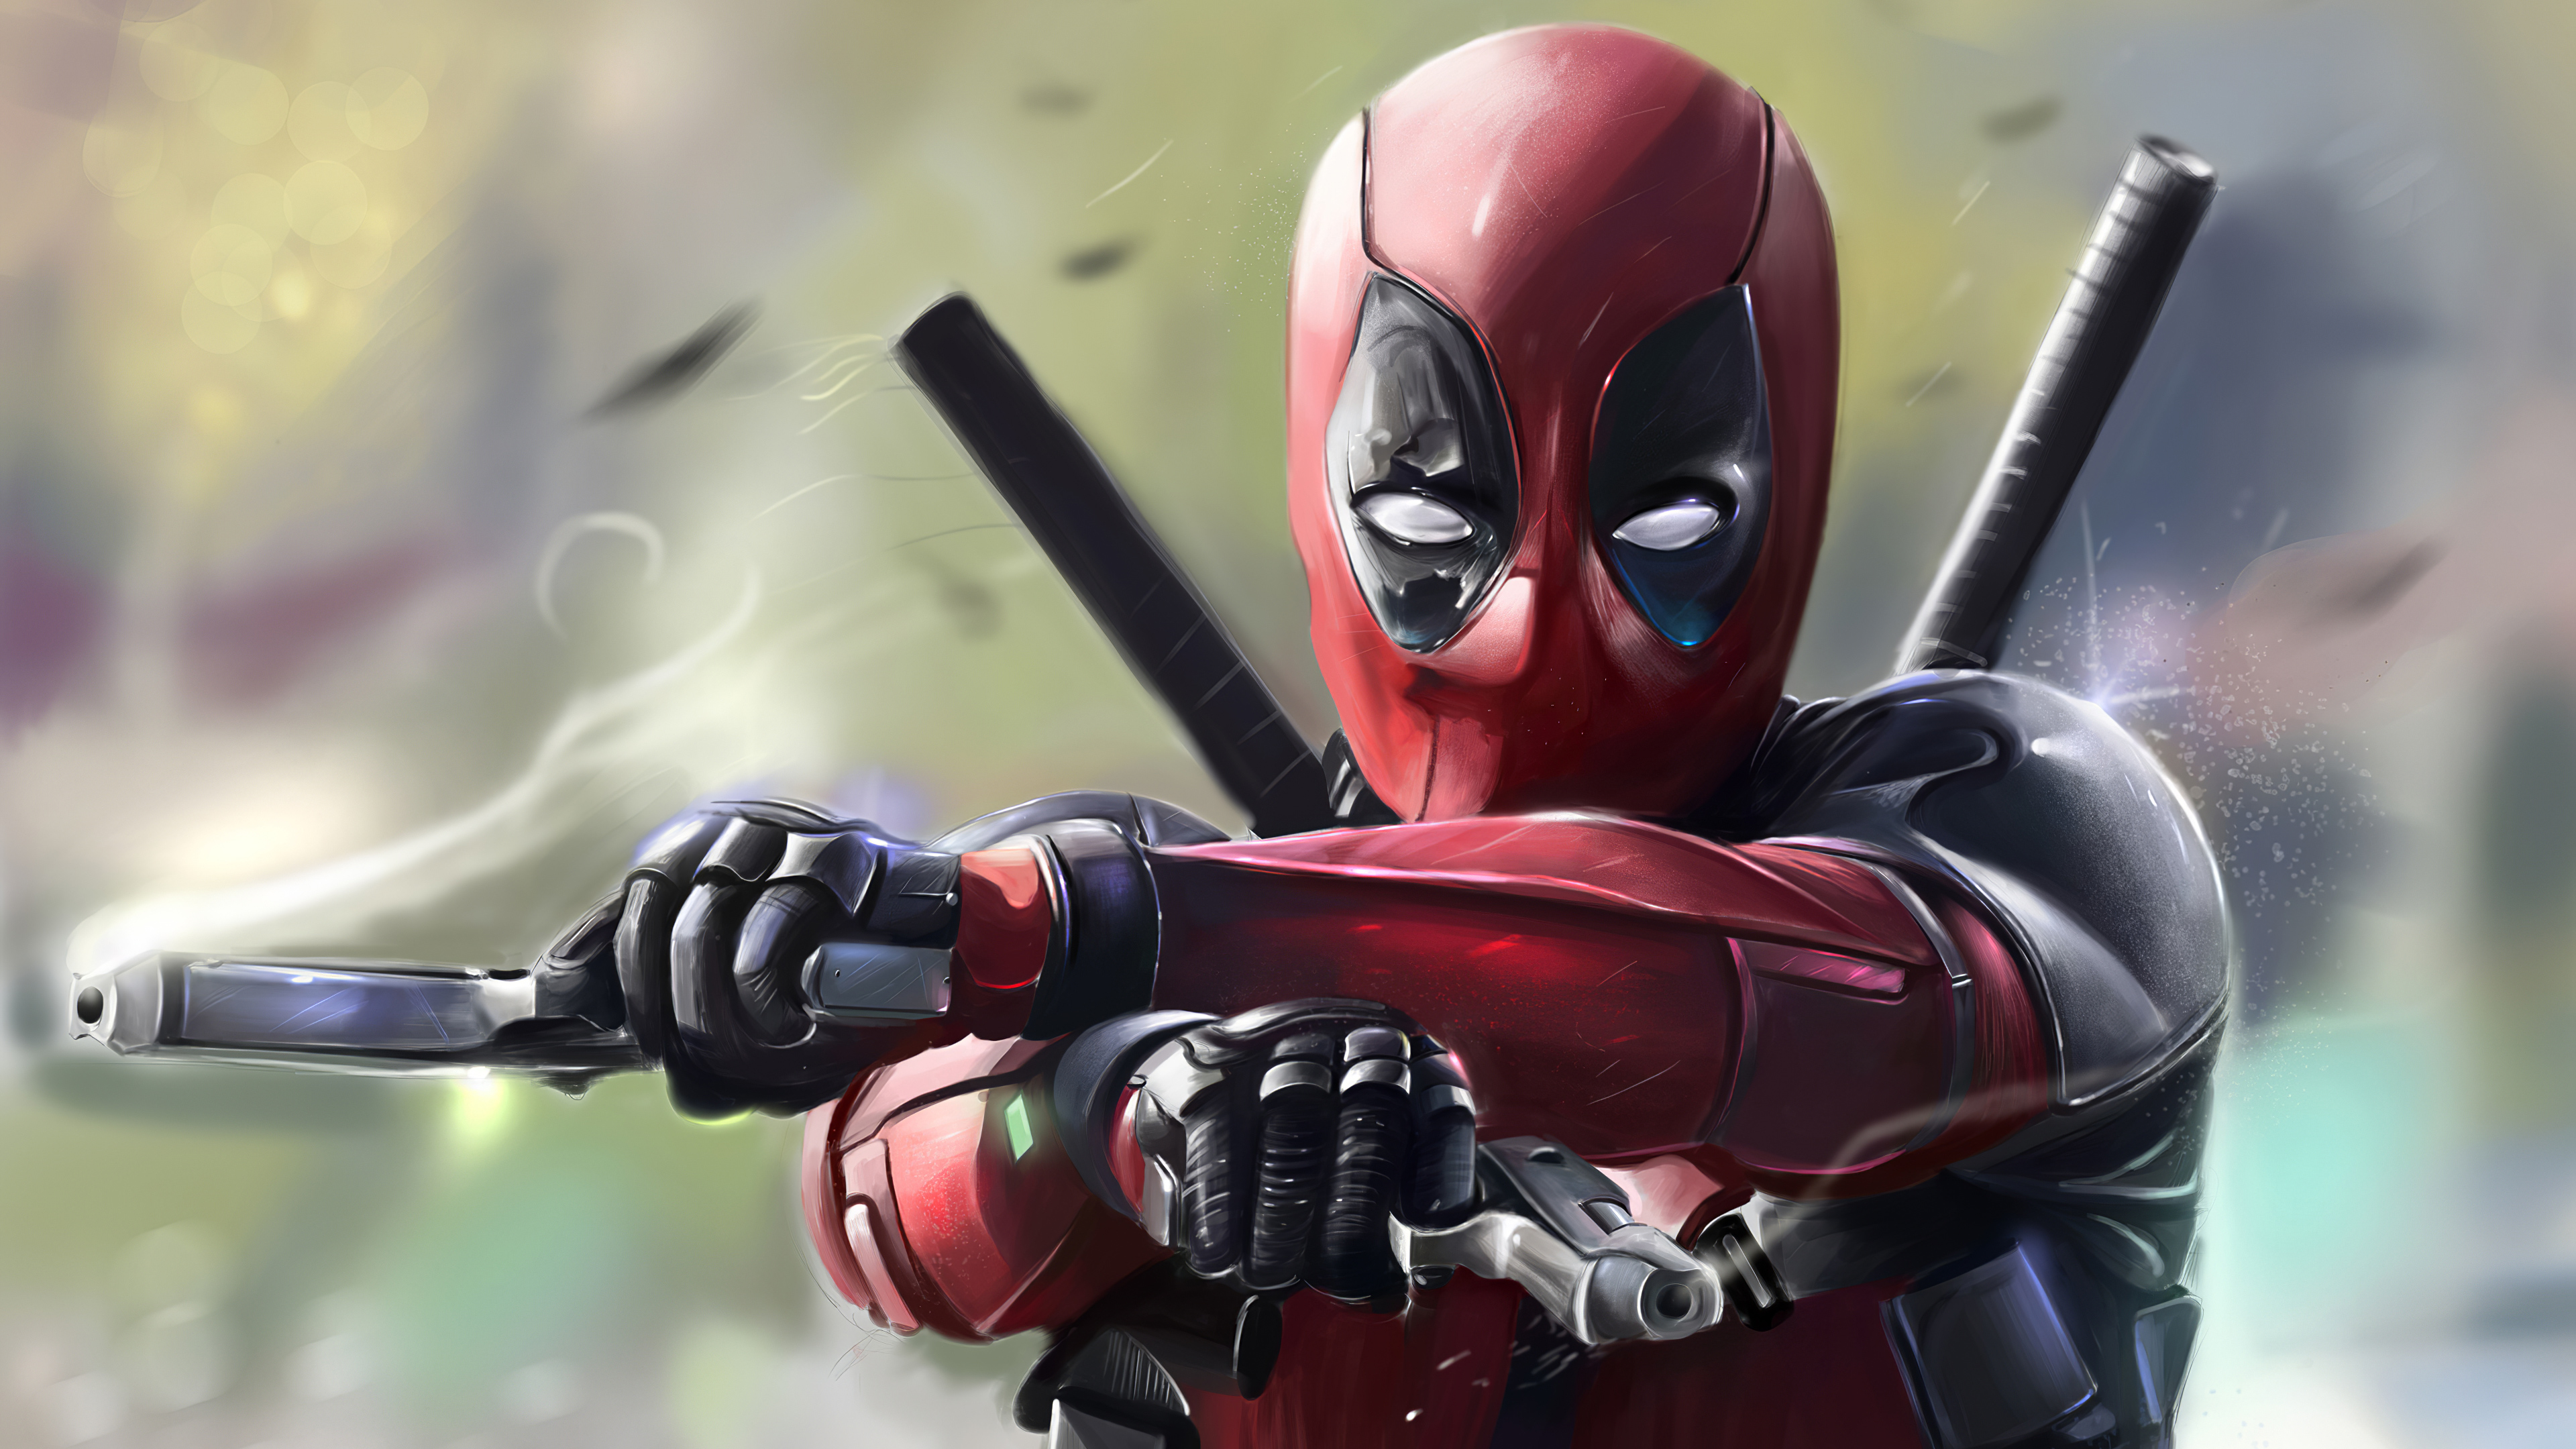 1920x1080 Deadpool 4k2020 Laptop Full HD 1080P HD 4k Wallpapers, Images,  Backgrounds, Photos and Pictures